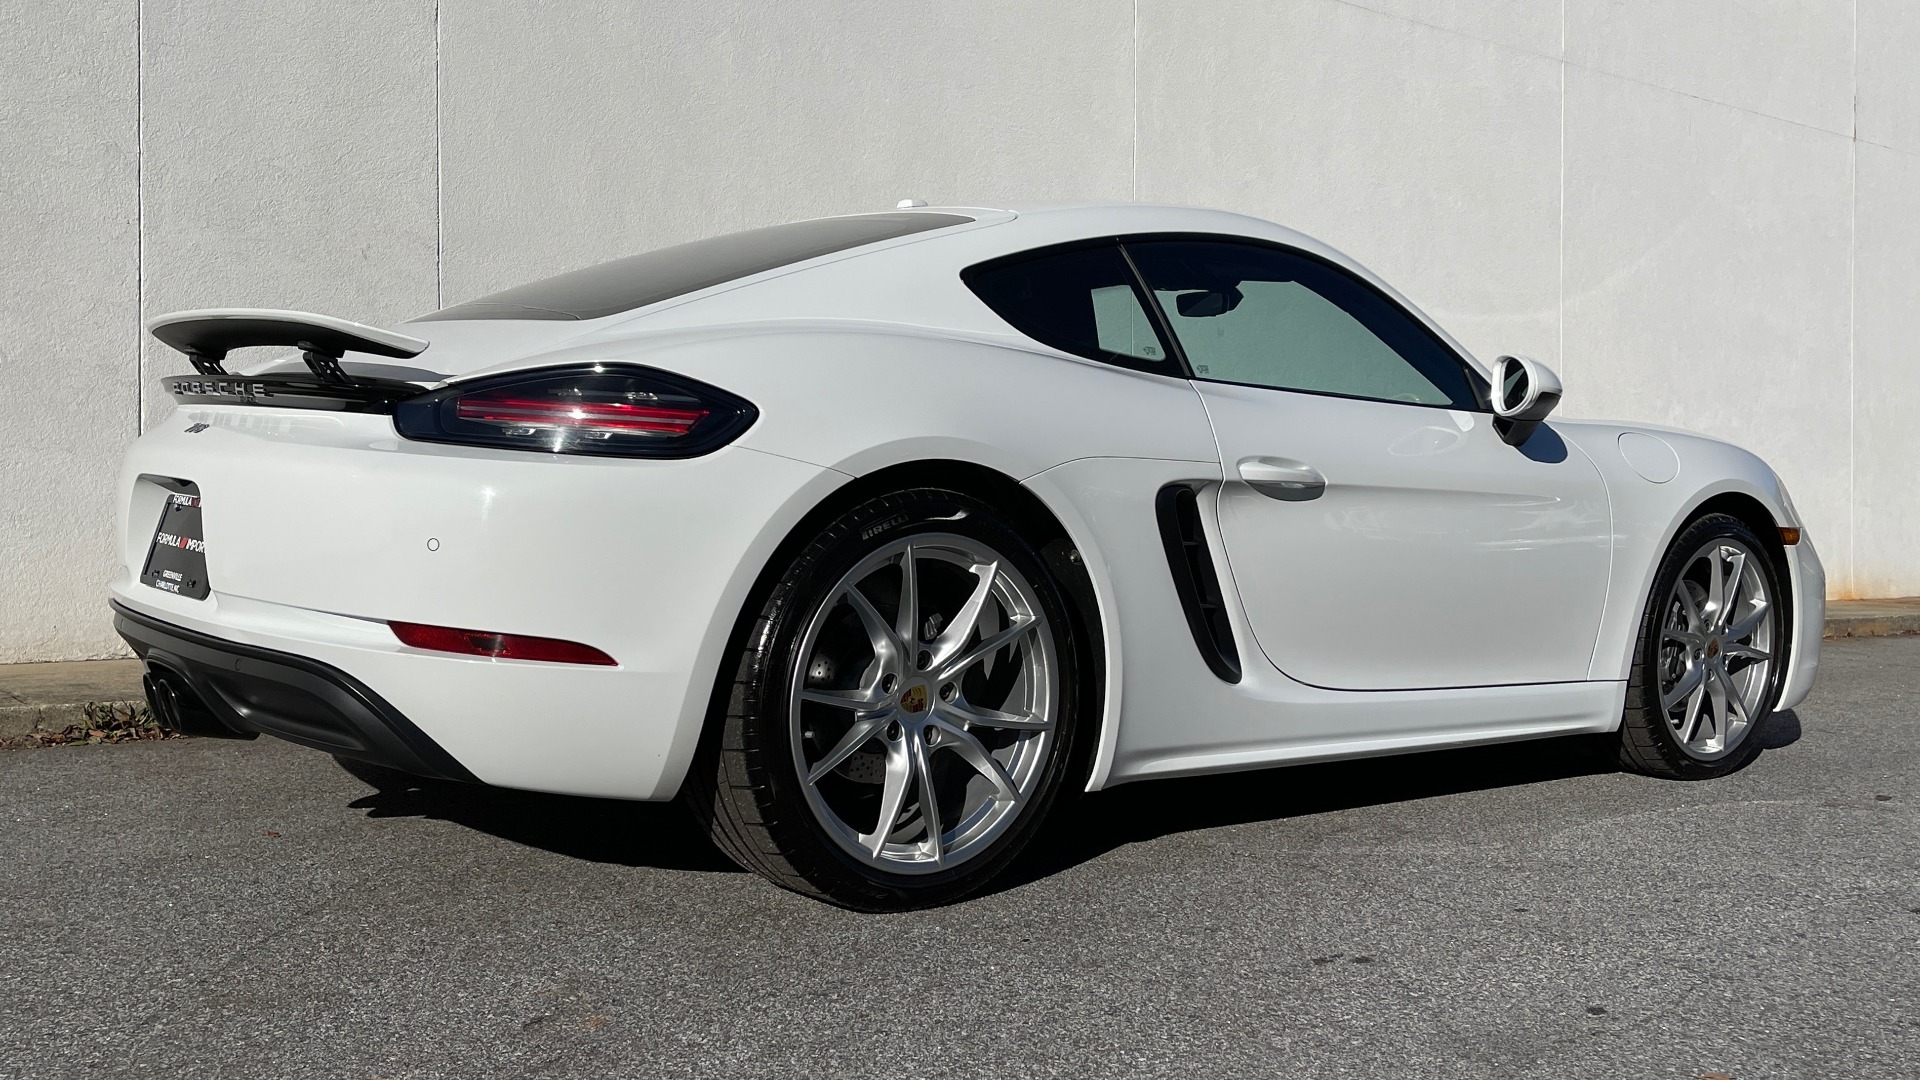 Used 2017 Porsche 718 CAYMAN COUPE / 2.0L TURBO / 6-SPD MANUAL / BOSE / 20-INCH WHEELS for sale $49,395 at Formula Imports in Charlotte NC 28227 7